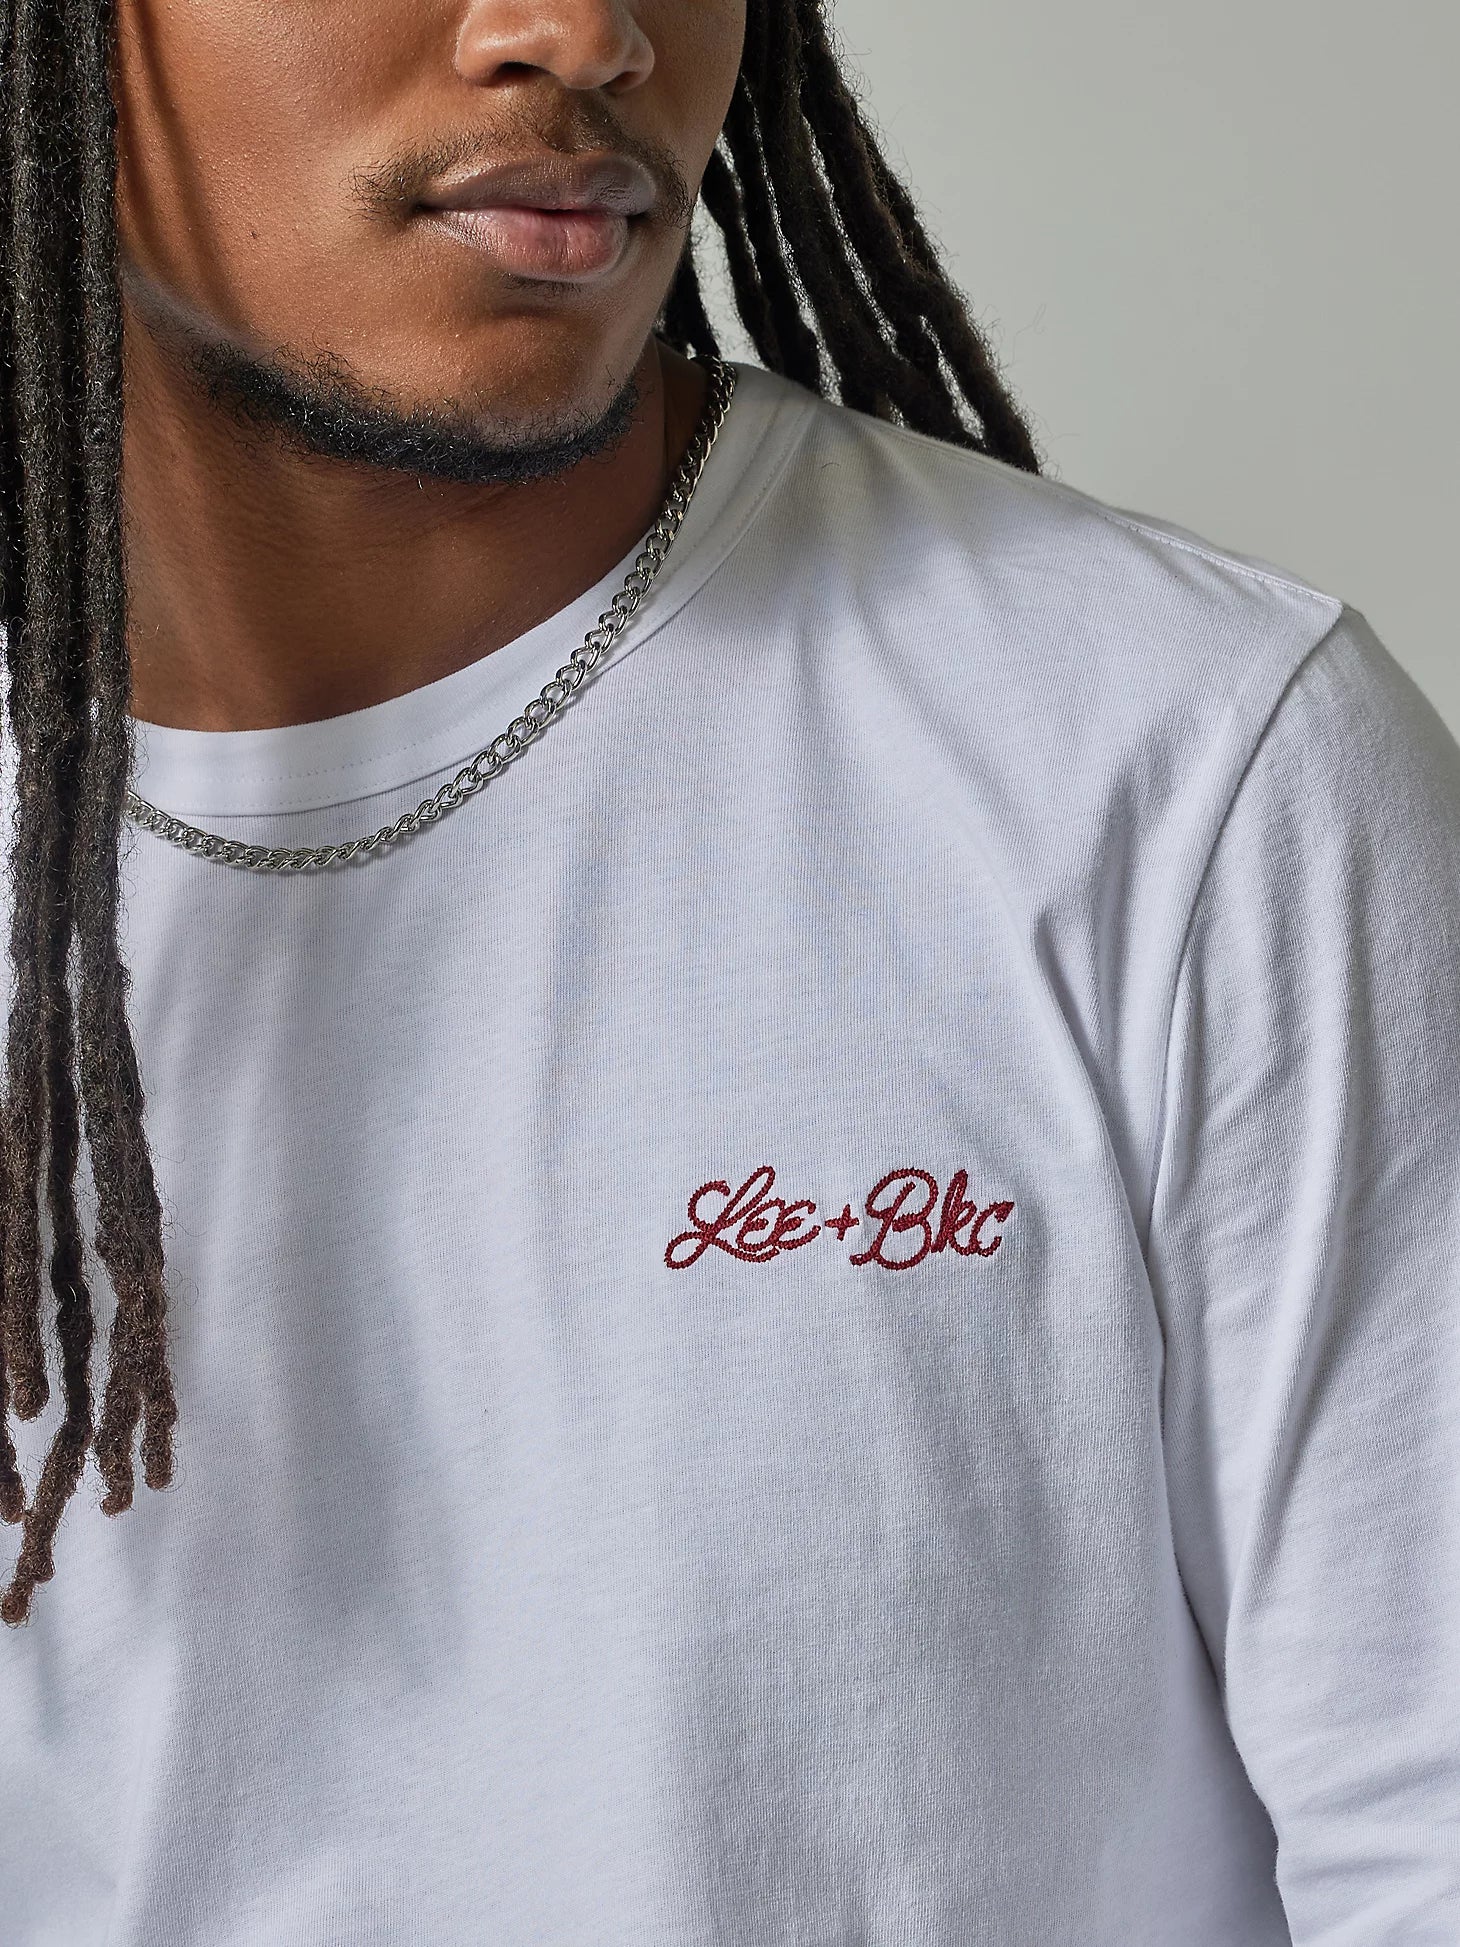 THE LEE® X BROOKLYN CIRCUS® Long Sleeve Tee in White - City Workshop Men's Supply Co.